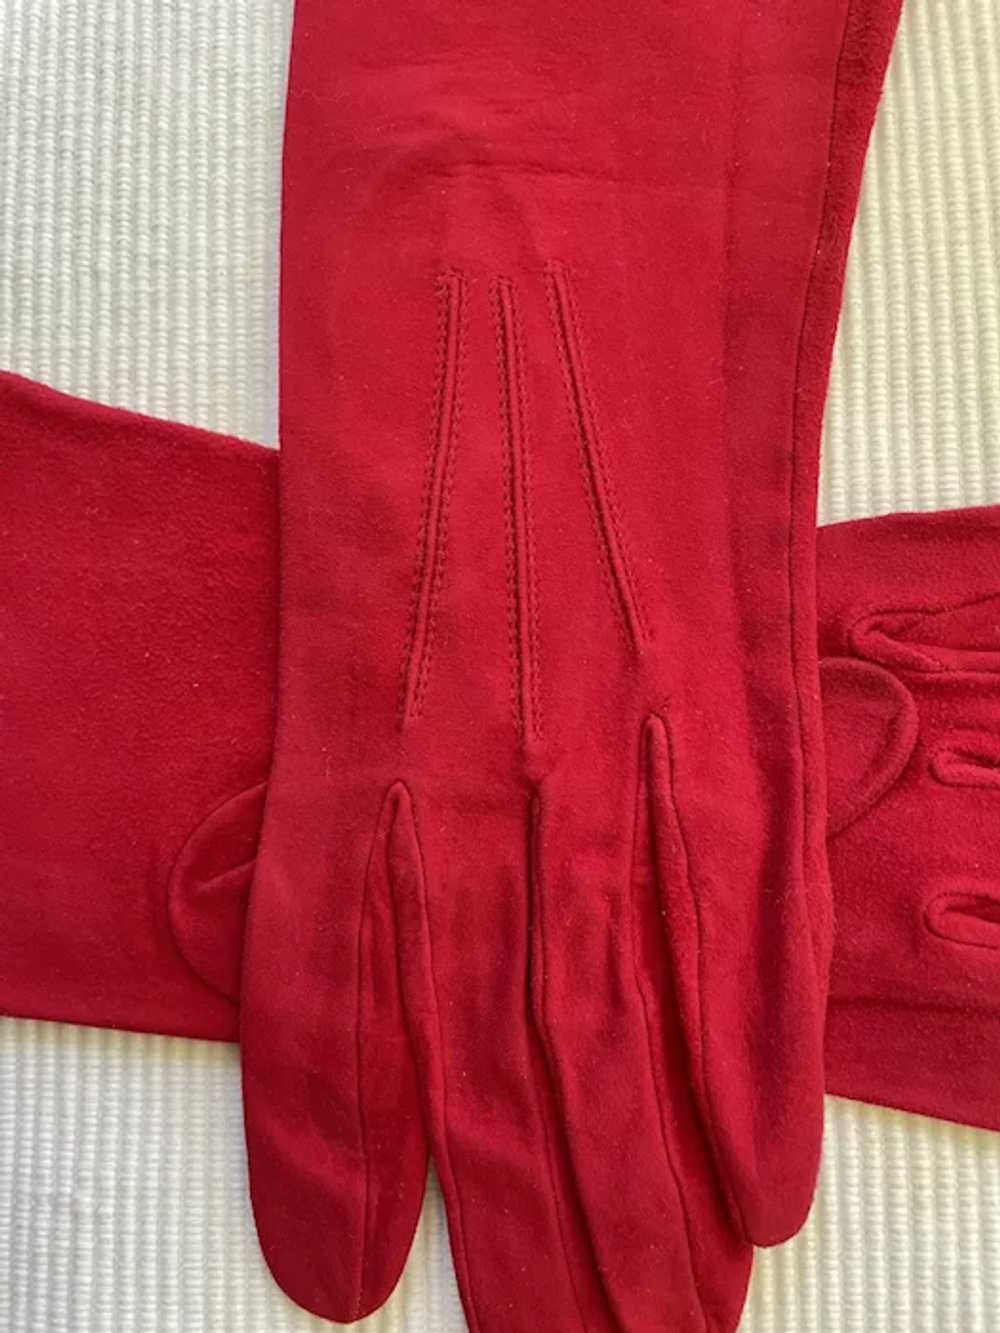 Cherry Red French Suede Gloves - image 4